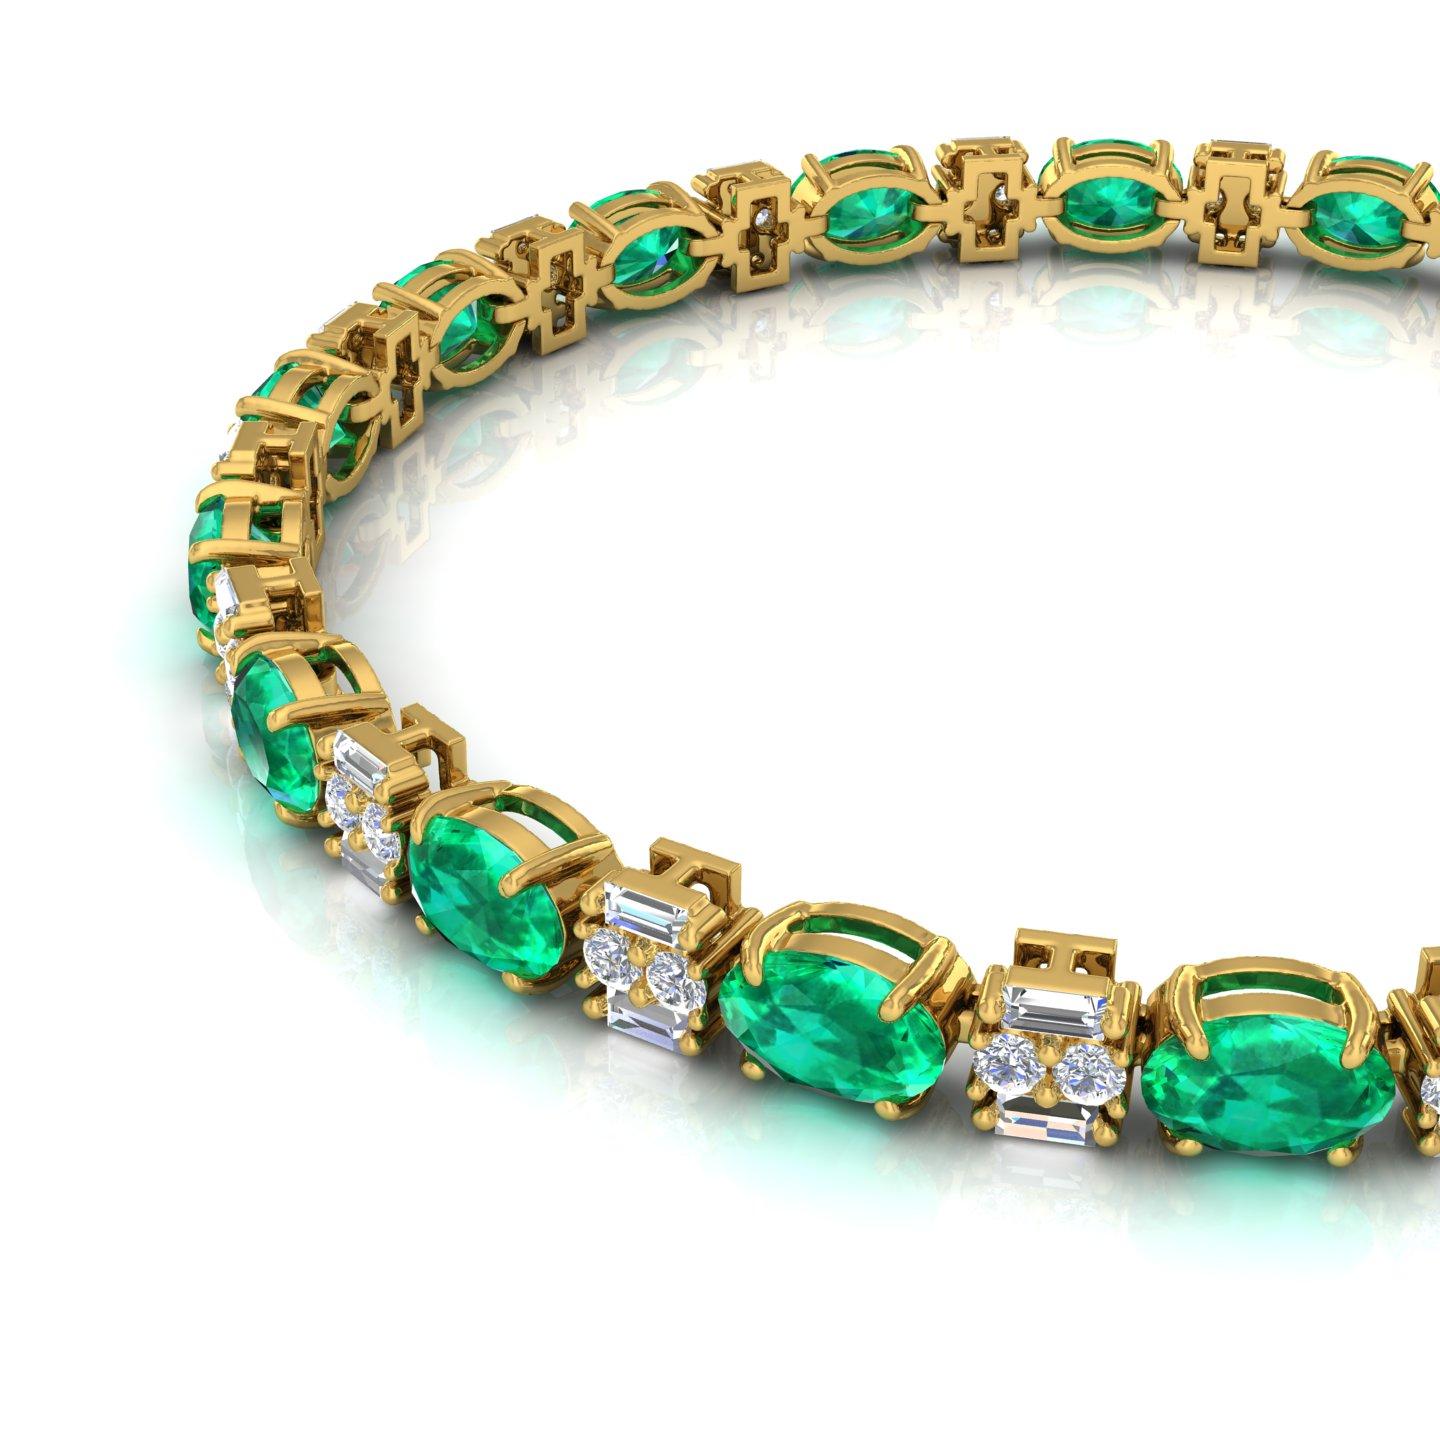 Item Code :- CN-14507
Gross Wt. :- 12.93 gm
18k Solid Yellow Gold Wt. :- 11.00 gm
Natural Diamond Wt. :- 1.50 Ct. ( AVERAGE DIAMOND CLARITY SI1-SI2 & COLOR H-I )
Natural Zambian Emerald Wt. :- 8.16 Ct.
Bracelet Length :- 7 Inches

✦